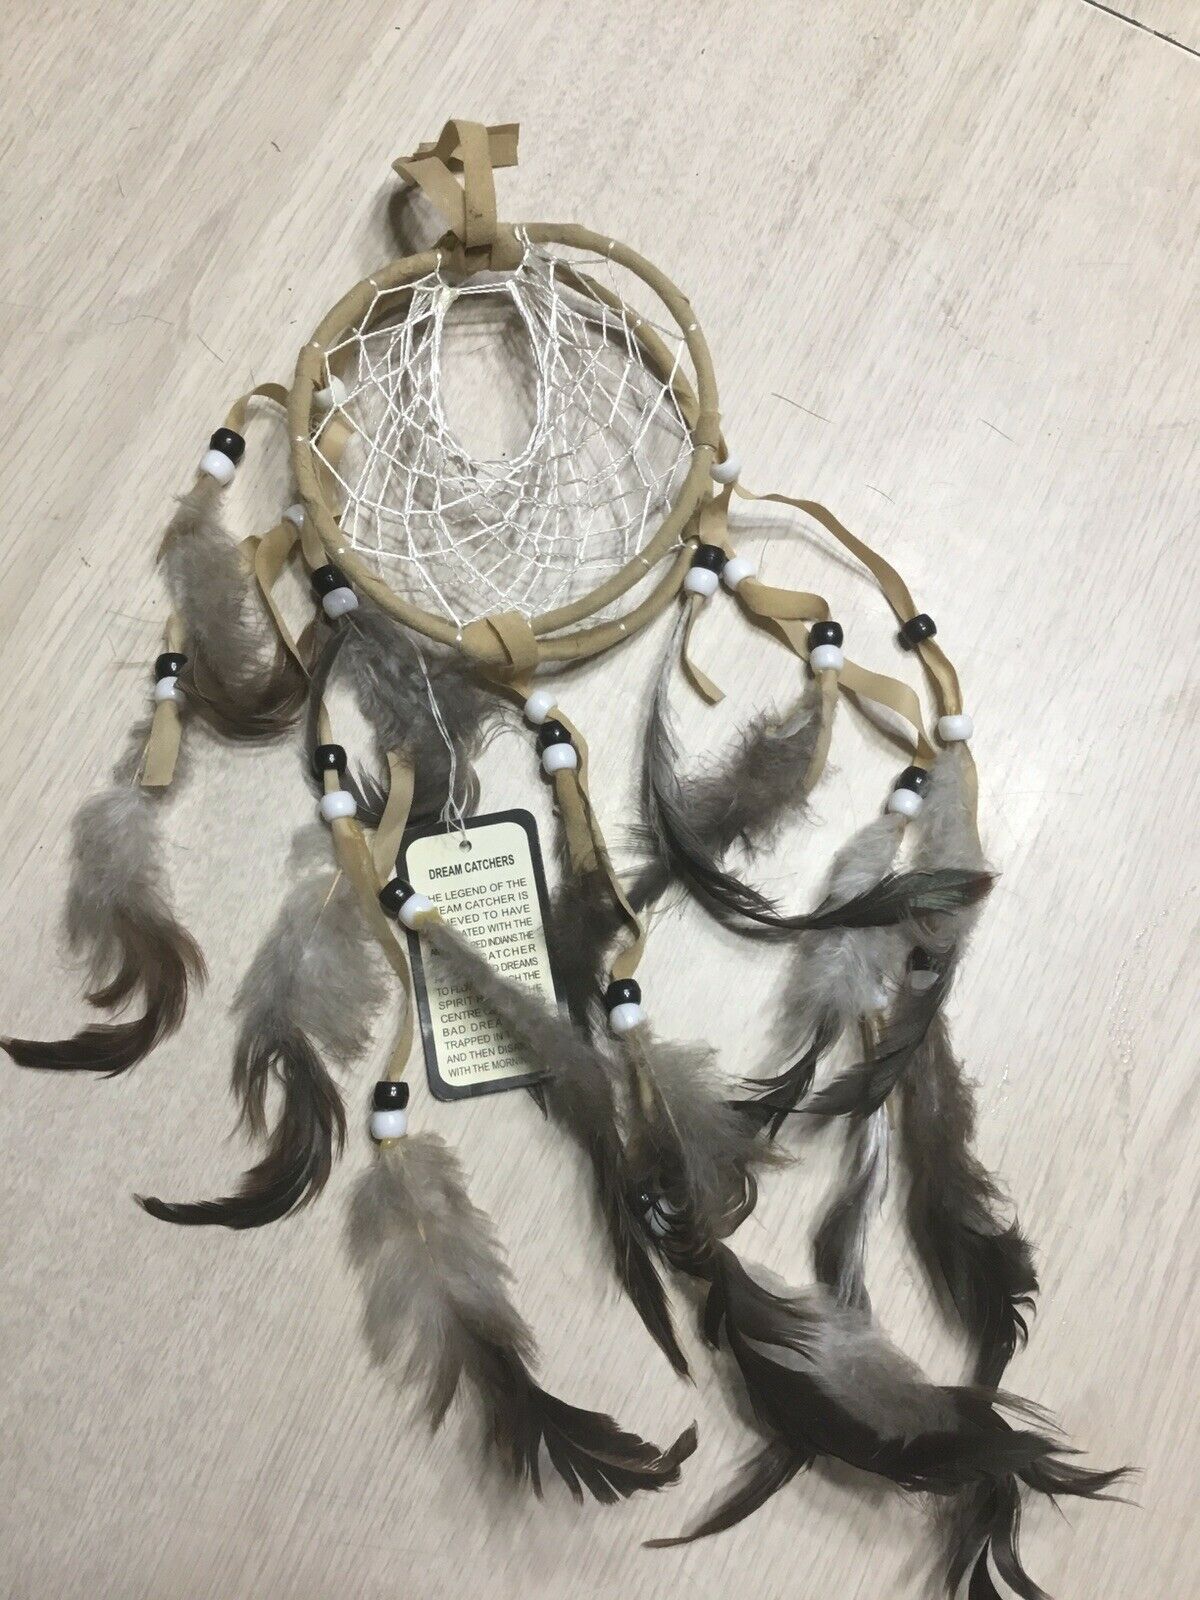 Dream Catcher 4” Diam, New Never Displayed Double Ring Lovely Feathers, Beads